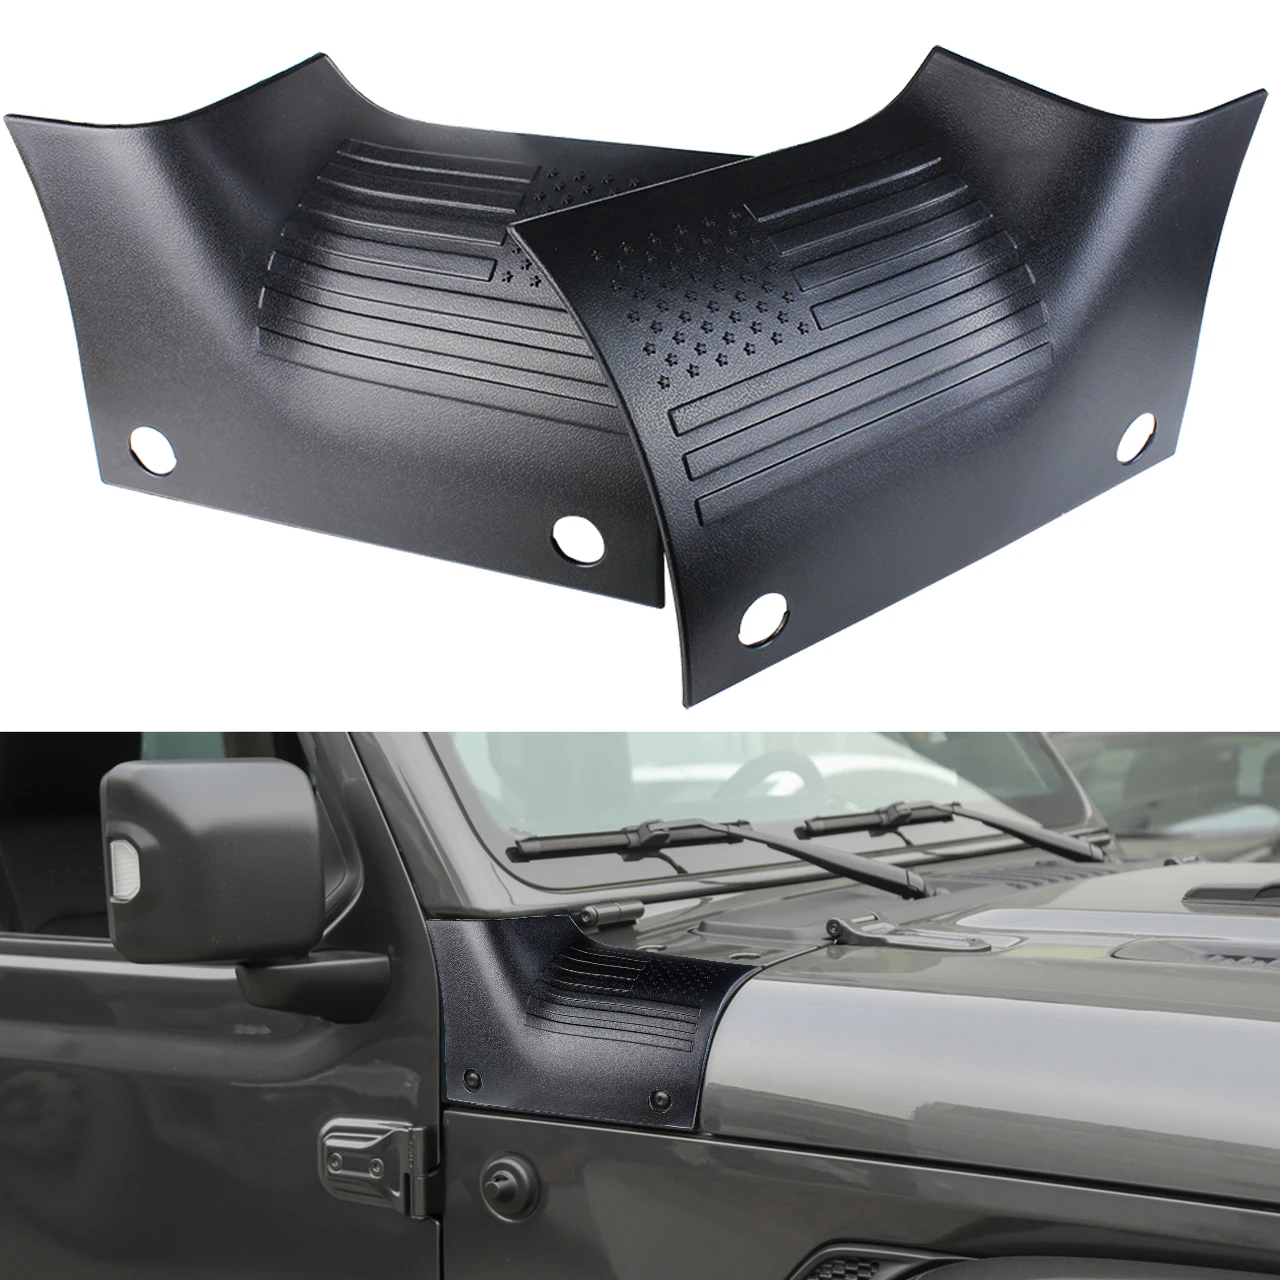 ABS JL Wrap Angle Cover Side Outer Cowl Body Armor Covers Corner Guards Kit For Jeep Wrangler JL JLU 2018 2019